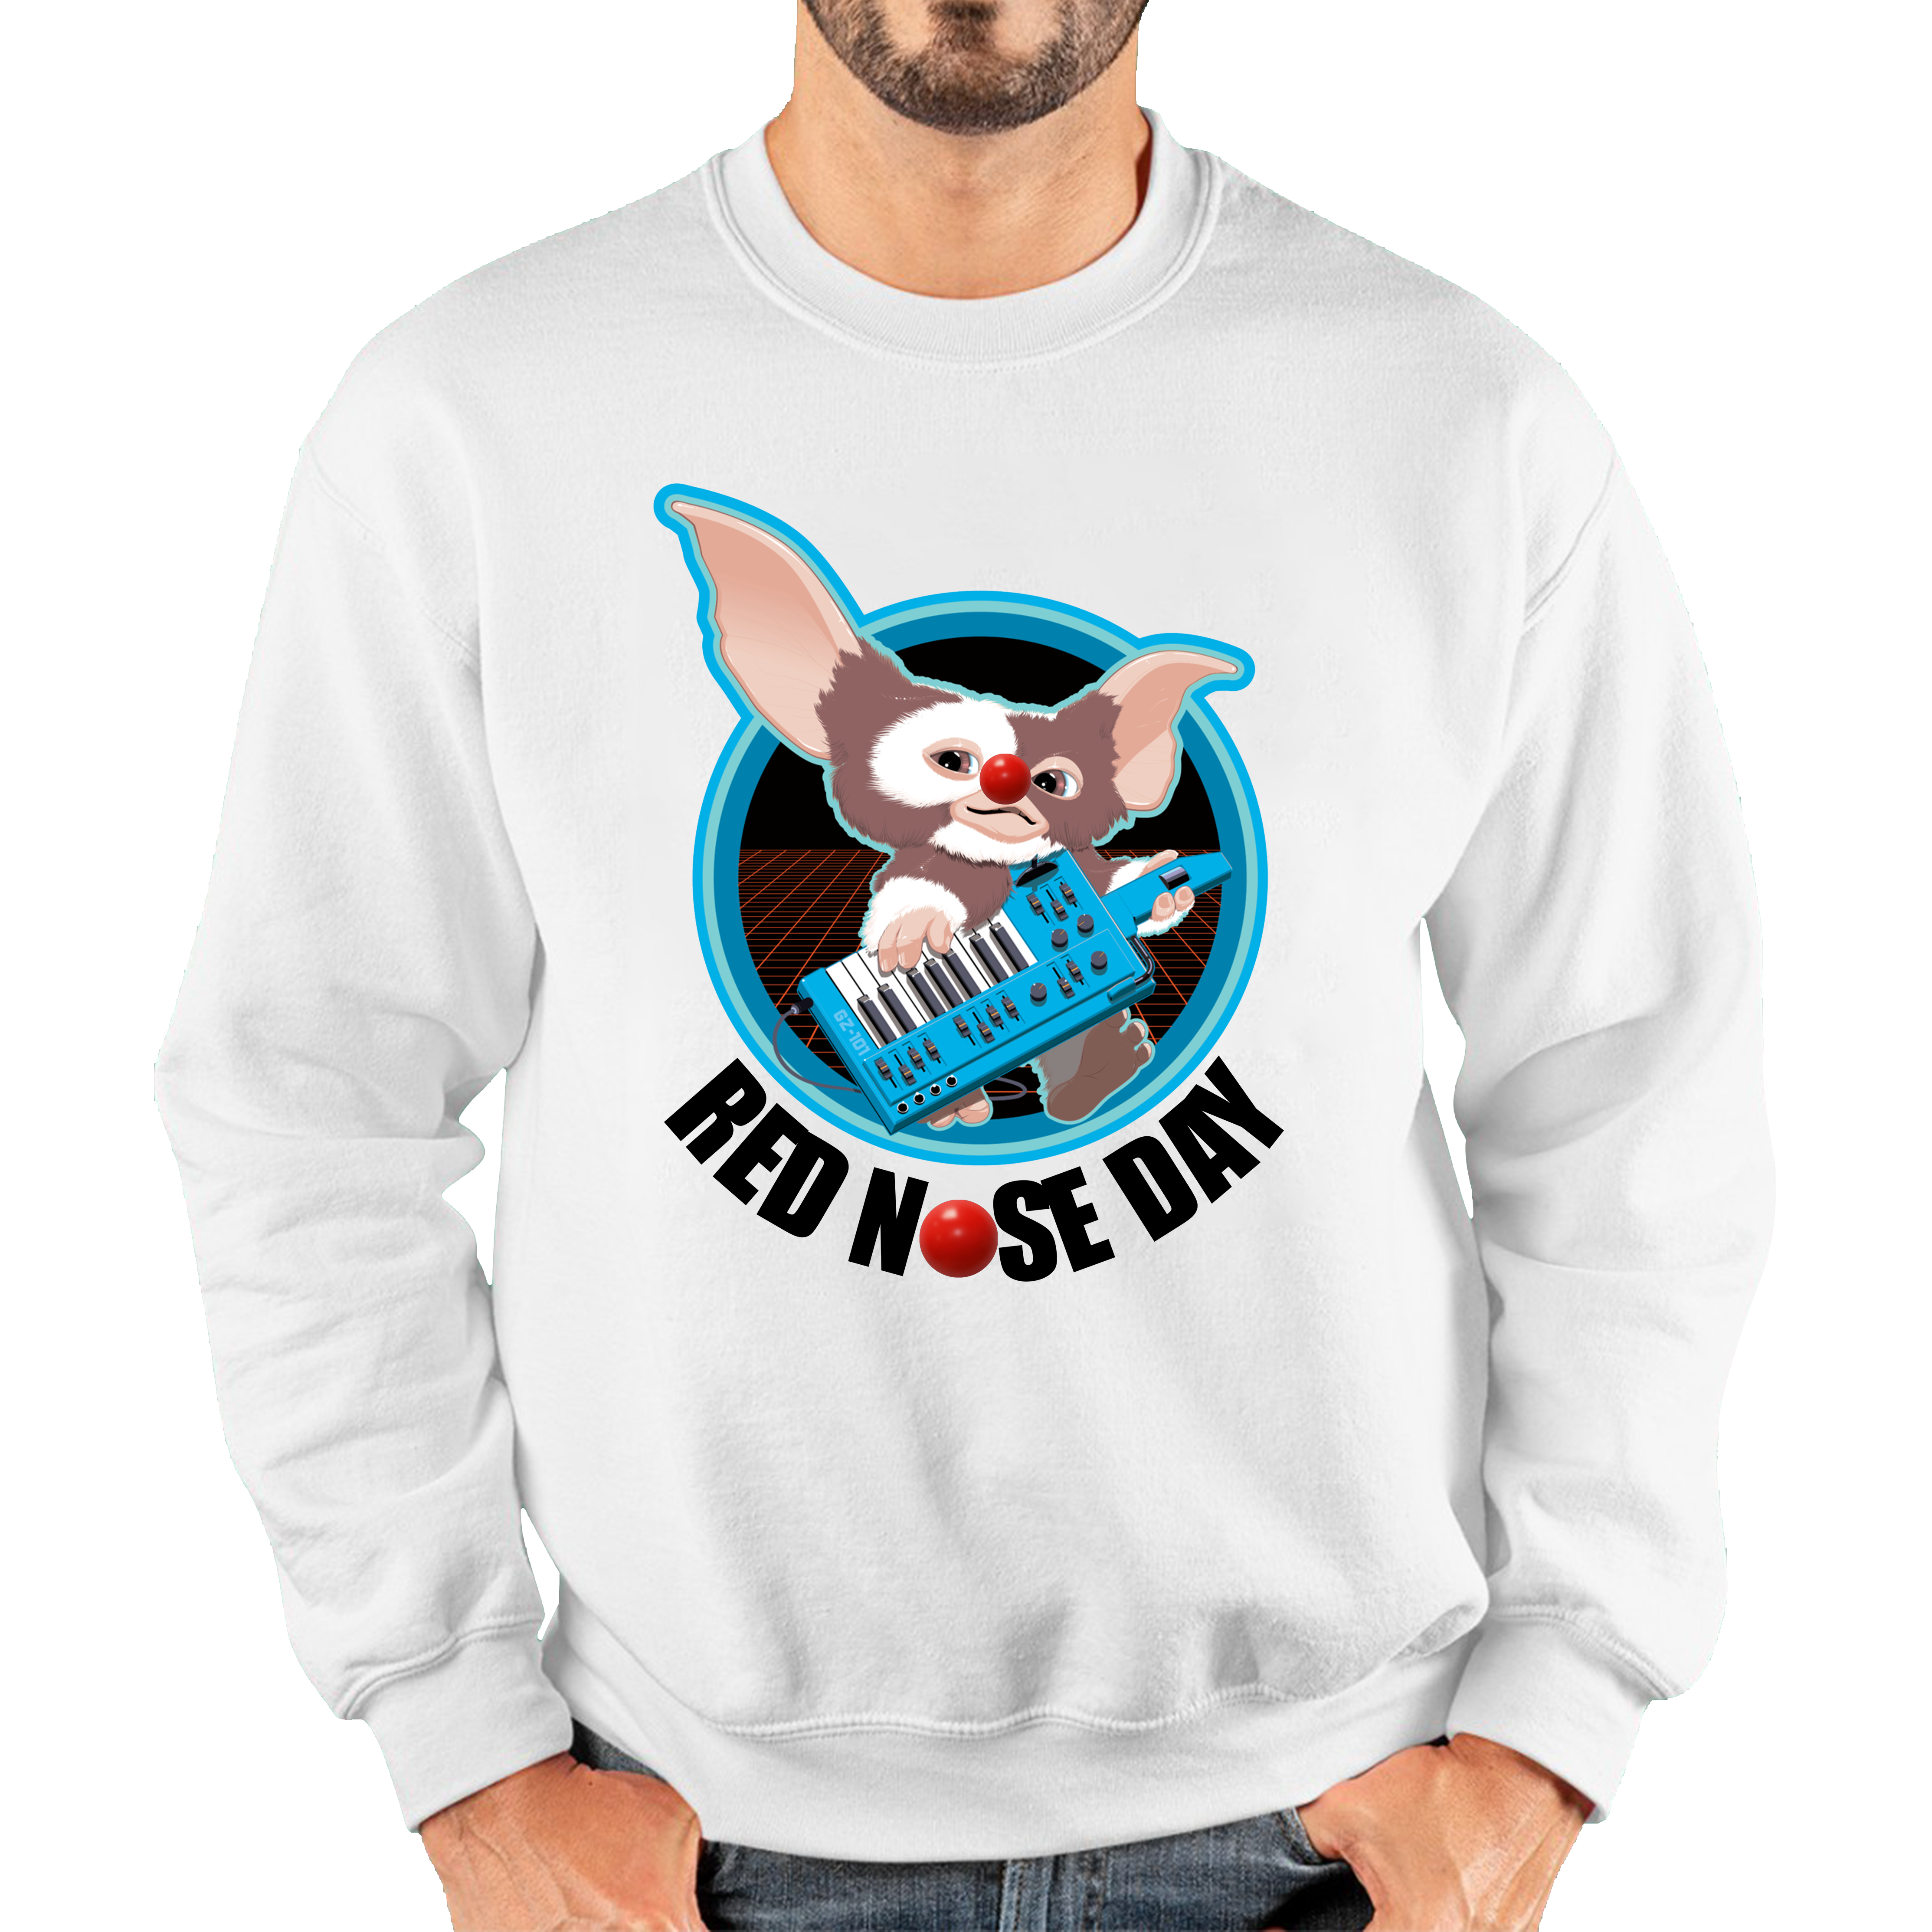 Gremlins Gizmo Piano Red Nose Day Adult Sweatshirt. 50% Goes To Charity